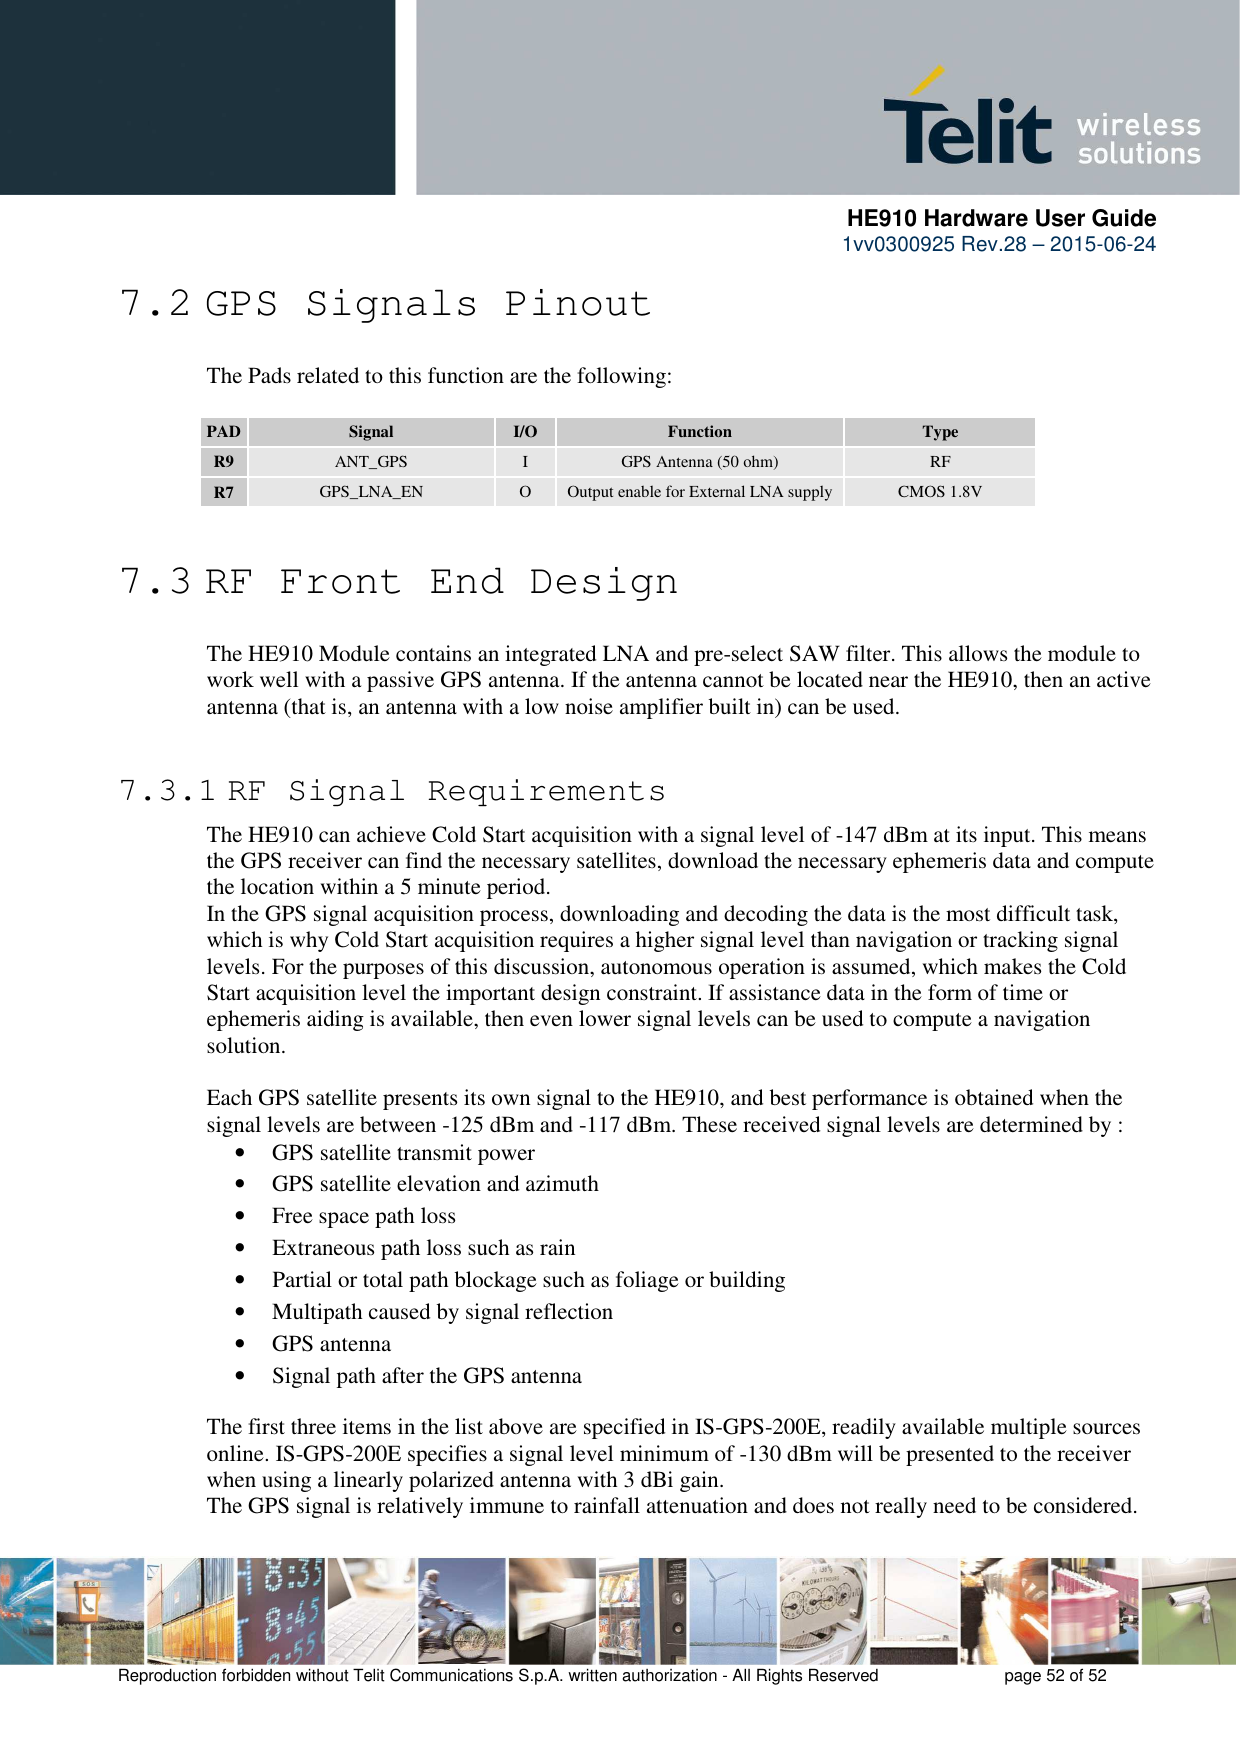      HE910 Hardware User Guide 1vv0300925 Rev.28 – 2015-06-24    Reproduction forbidden without Telit Communications S.p.A. written authorization - All Rights Reserved    page 52 of 52  7.2 GPS Signals Pinout The Pads related to this function are the following:  PAD Signal  I/O  Function  Type R9  ANT_GPS  I  GPS Antenna (50 ohm)  RF R7  GPS_LNA_EN  O  Output enable for External LNA supply  CMOS 1.8V  7.3 RF Front End Design The HE910 Module contains an integrated LNA and pre-select SAW filter. This allows the module to work well with a passive GPS antenna. If the antenna cannot be located near the HE910, then an active antenna (that is, an antenna with a low noise amplifier built in) can be used.   7.3.1 RF Signal Requirements The HE910 can achieve Cold Start acquisition with a signal level of -147 dBm at its input. This means the GPS receiver can find the necessary satellites, download the necessary ephemeris data and compute the location within a 5 minute period.  In the GPS signal acquisition process, downloading and decoding the data is the most difficult task, which is why Cold Start acquisition requires a higher signal level than navigation or tracking signal levels. For the purposes of this discussion, autonomous operation is assumed, which makes the Cold Start acquisition level the important design constraint. If assistance data in the form of time or ephemeris aiding is available, then even lower signal levels can be used to compute a navigation solution.  Each GPS satellite presents its own signal to the HE910, and best performance is obtained when the signal levels are between -125 dBm and -117 dBm. These received signal levels are determined by : • GPS satellite transmit power • GPS satellite elevation and azimuth • Free space path loss • Extraneous path loss such as rain • Partial or total path blockage such as foliage or building • Multipath caused by signal reflection • GPS antenna • Signal path after the GPS antenna The first three items in the list above are specified in IS-GPS-200E, readily available multiple sources online. IS-GPS-200E specifies a signal level minimum of -130 dBm will be presented to the receiver when using a linearly polarized antenna with 3 dBi gain. The GPS signal is relatively immune to rainfall attenuation and does not really need to be considered. 